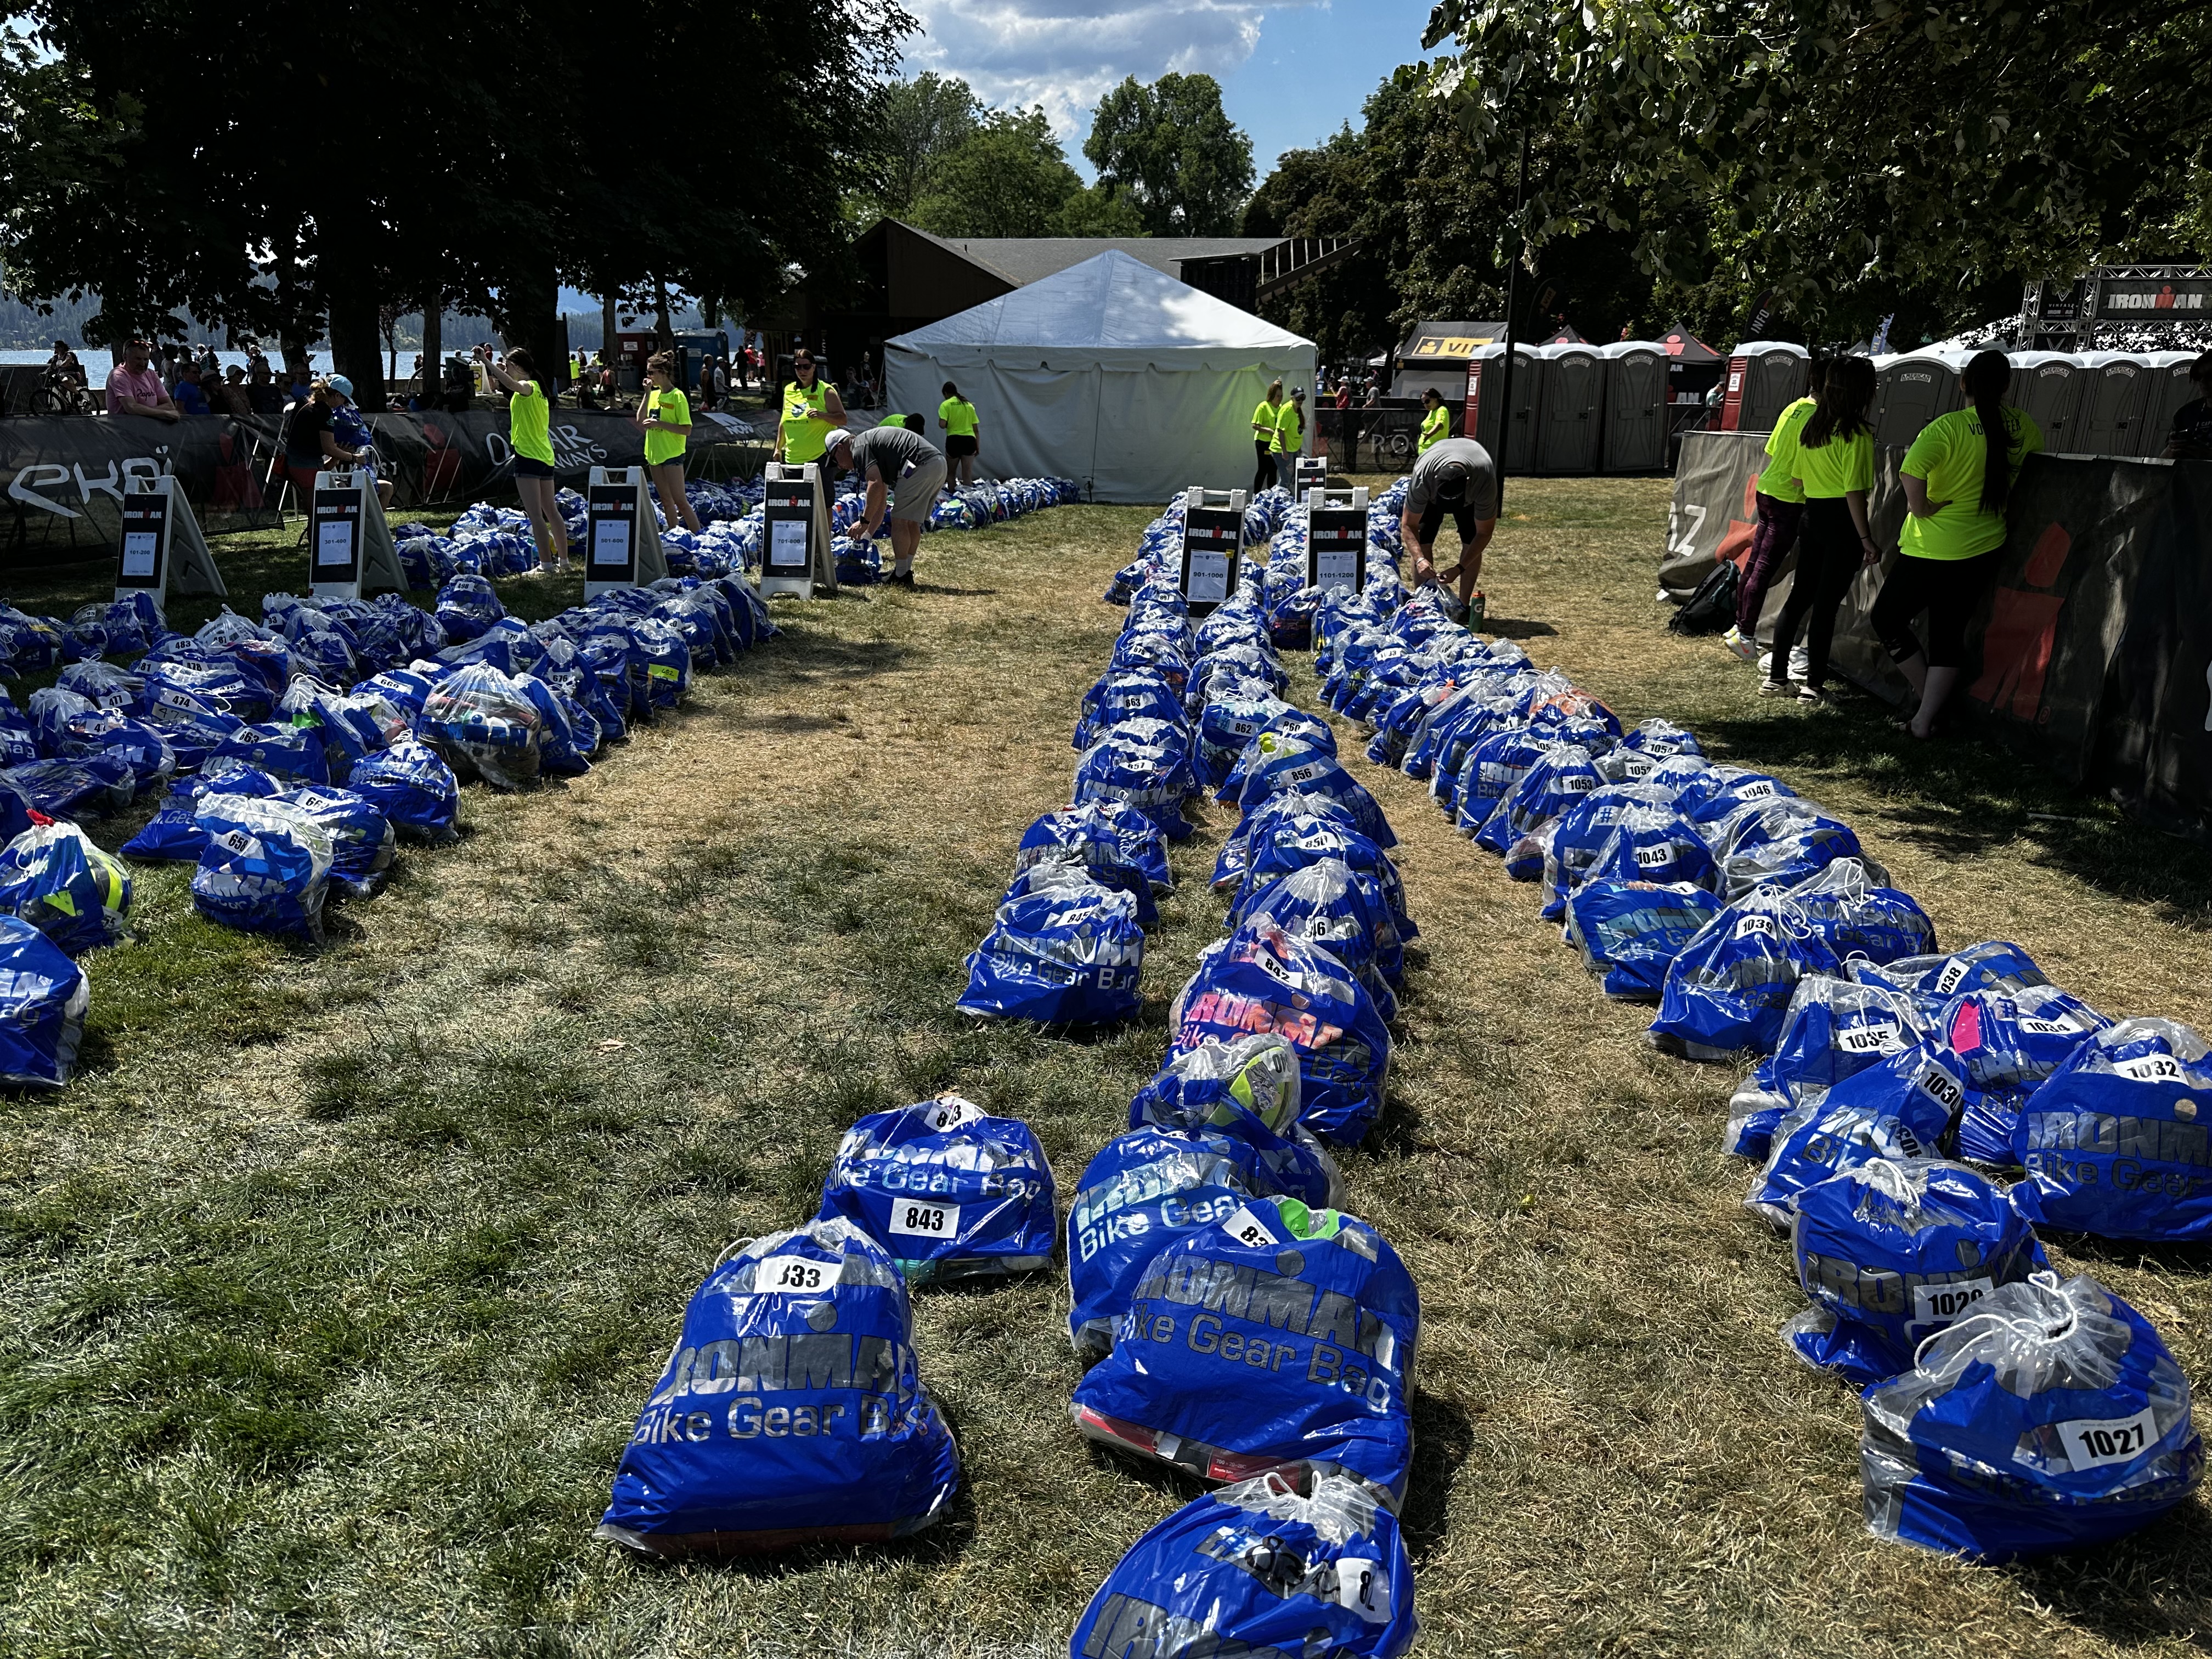 Blue bike gear bags arranged in rows on the ground at the transition area of Ironman Coeur d'Alene.